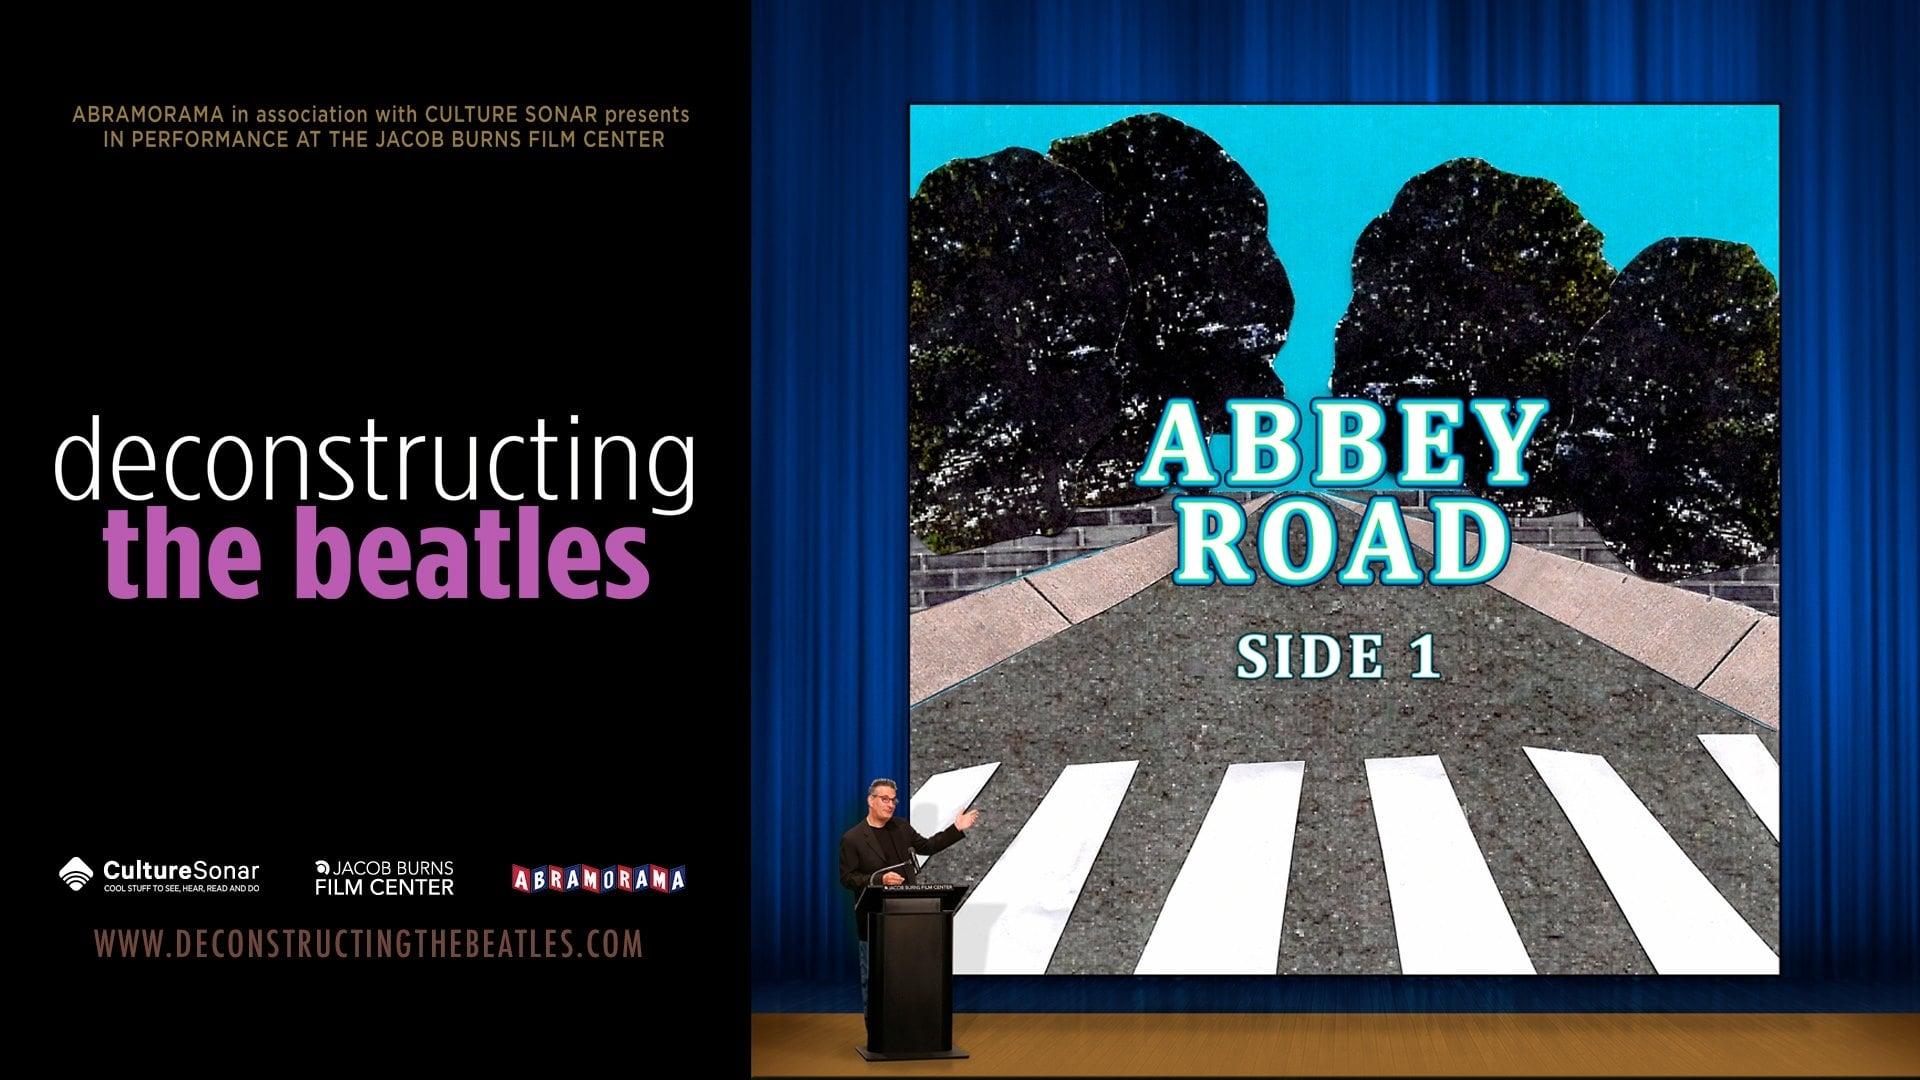 Deconstructing the Beatles' Abbey Road: Side 1 backdrop